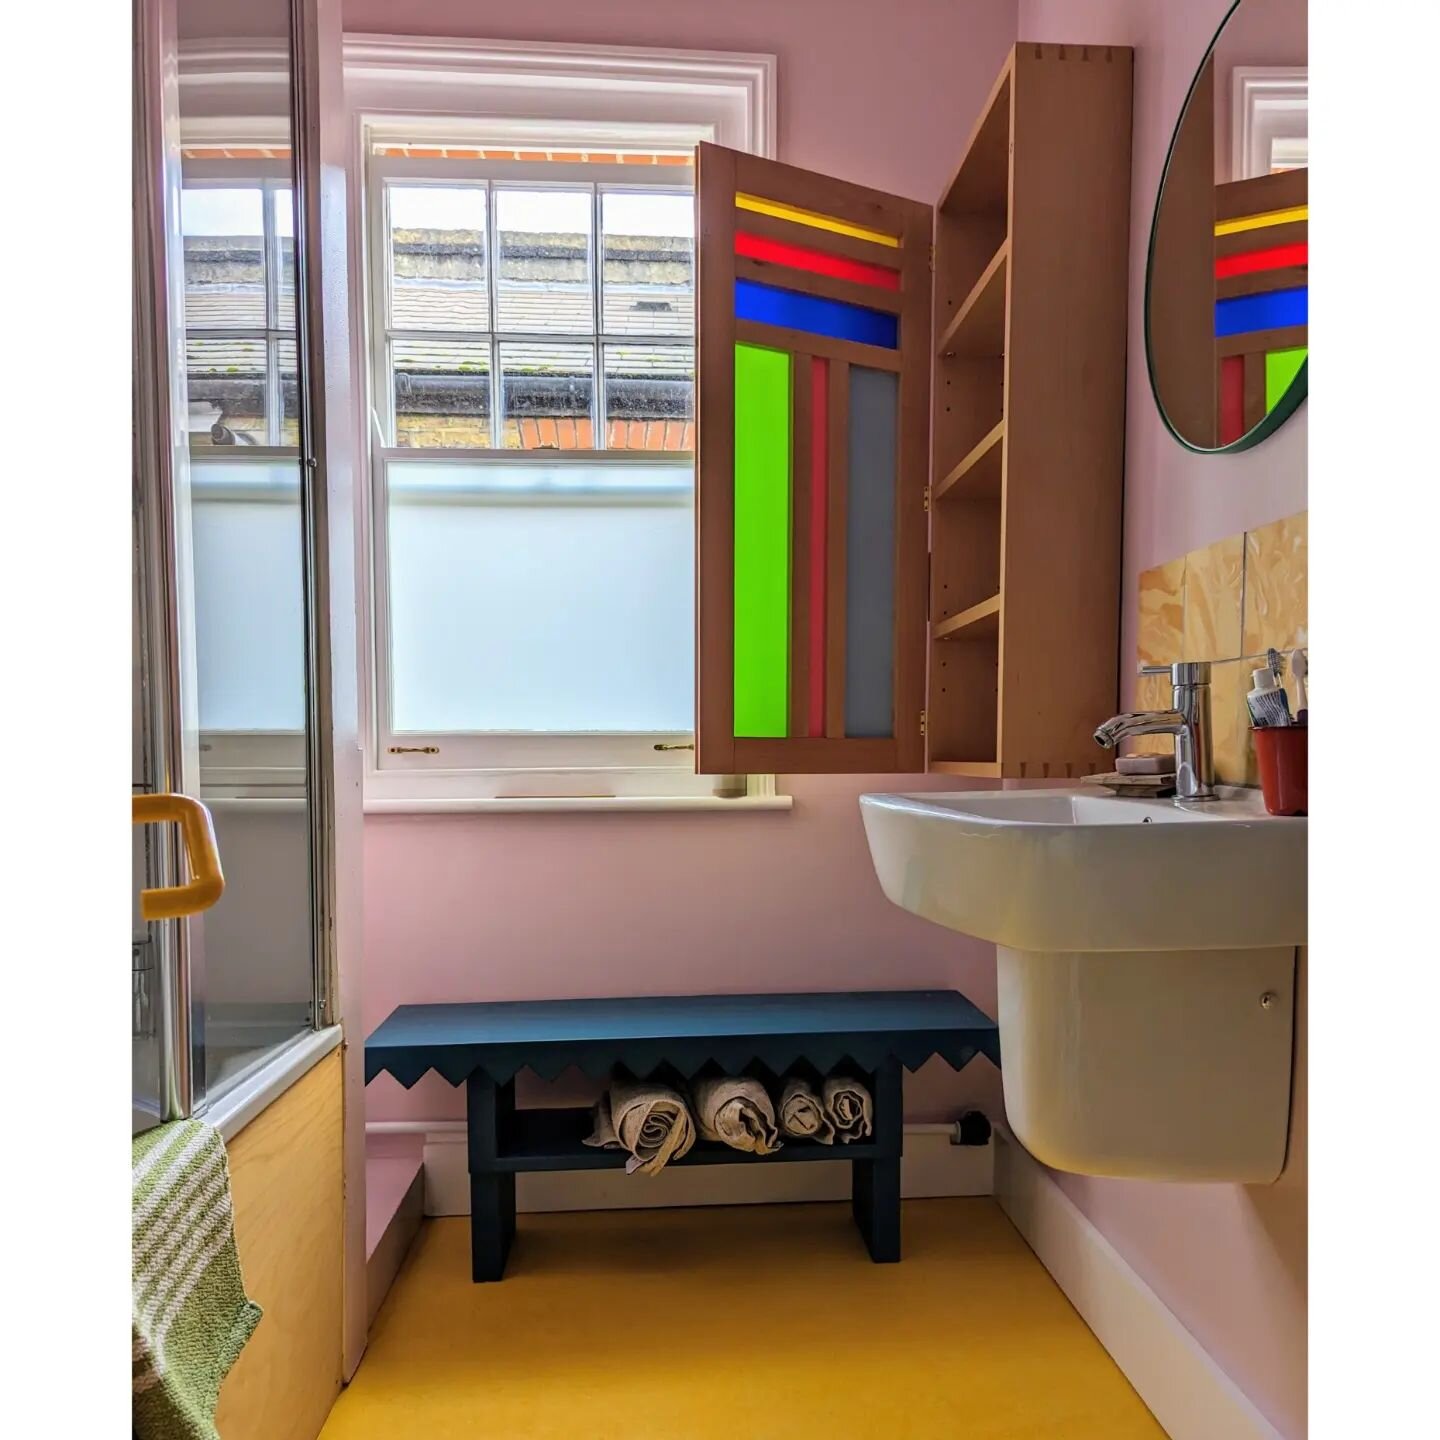 This large wall cabinet is the perfect place to store all those lotions and potions that can end up cluttering a petite bathroom. I love this colourful little bathroom, all the colour accents pop and accentuate each other in a really joyous way.

Han